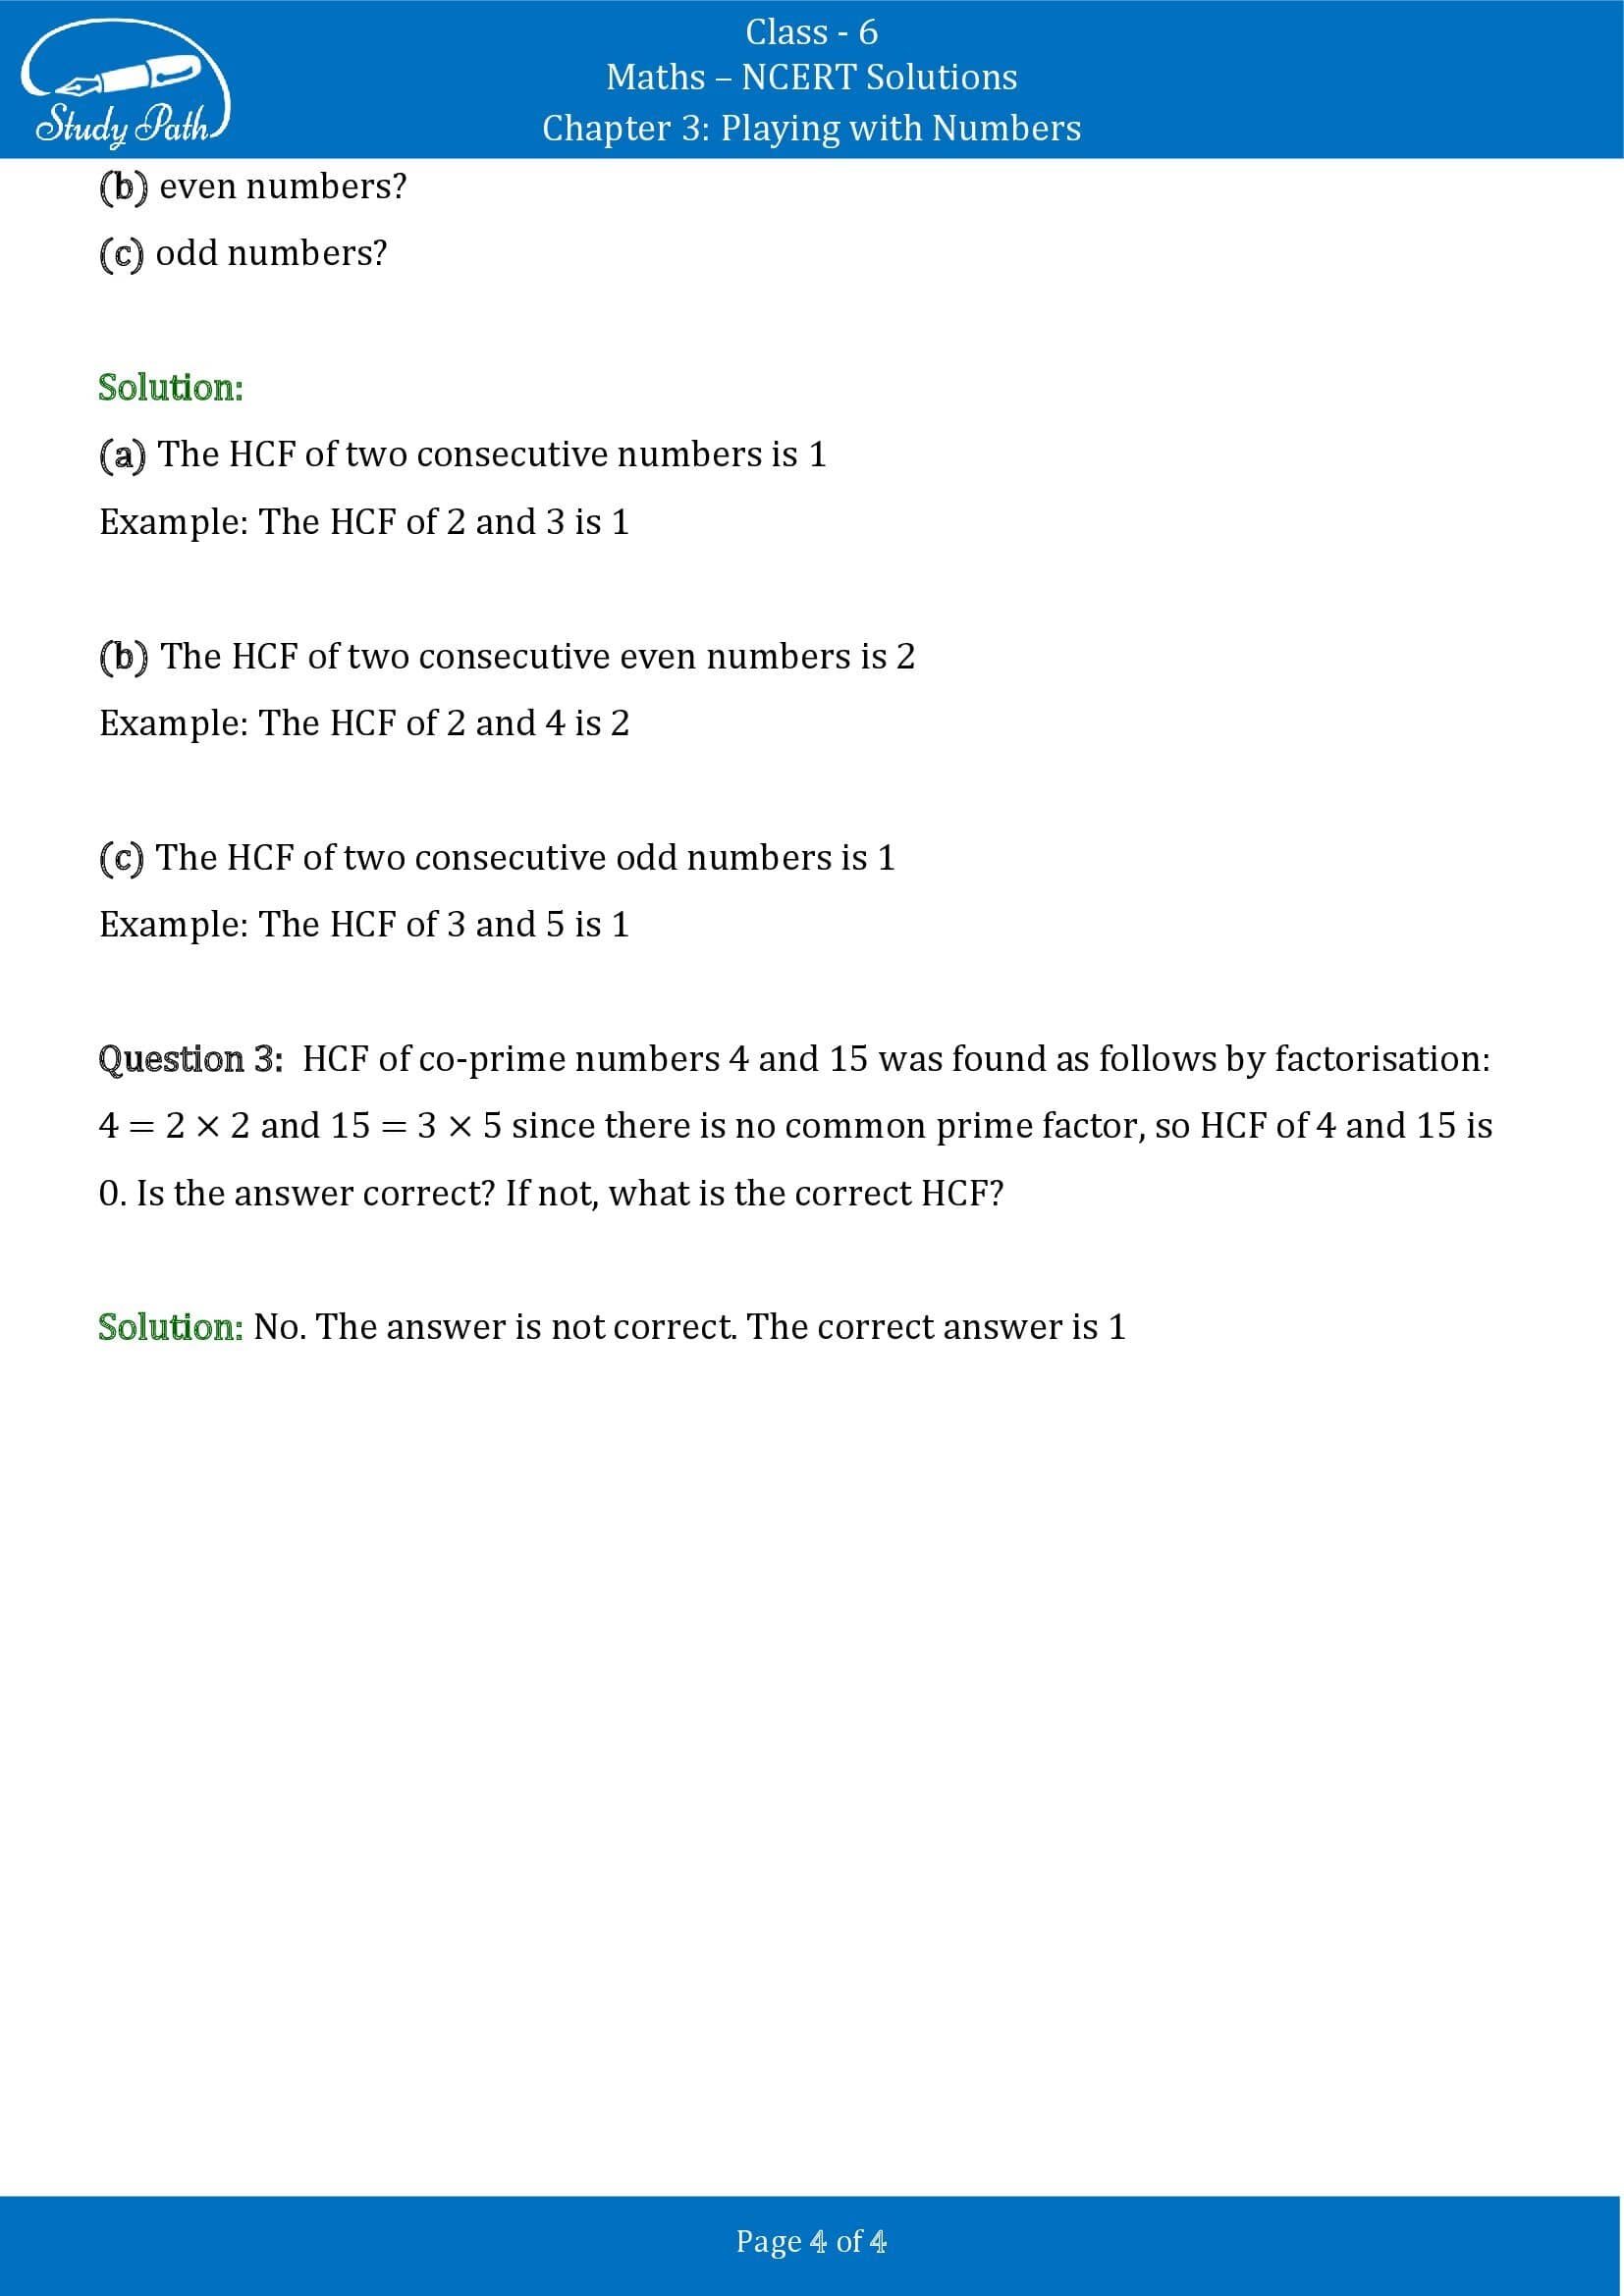 NCERT Solutions for Class 6 Maths Chapter 3 Playing with Numbers Exercise 3.6 00004